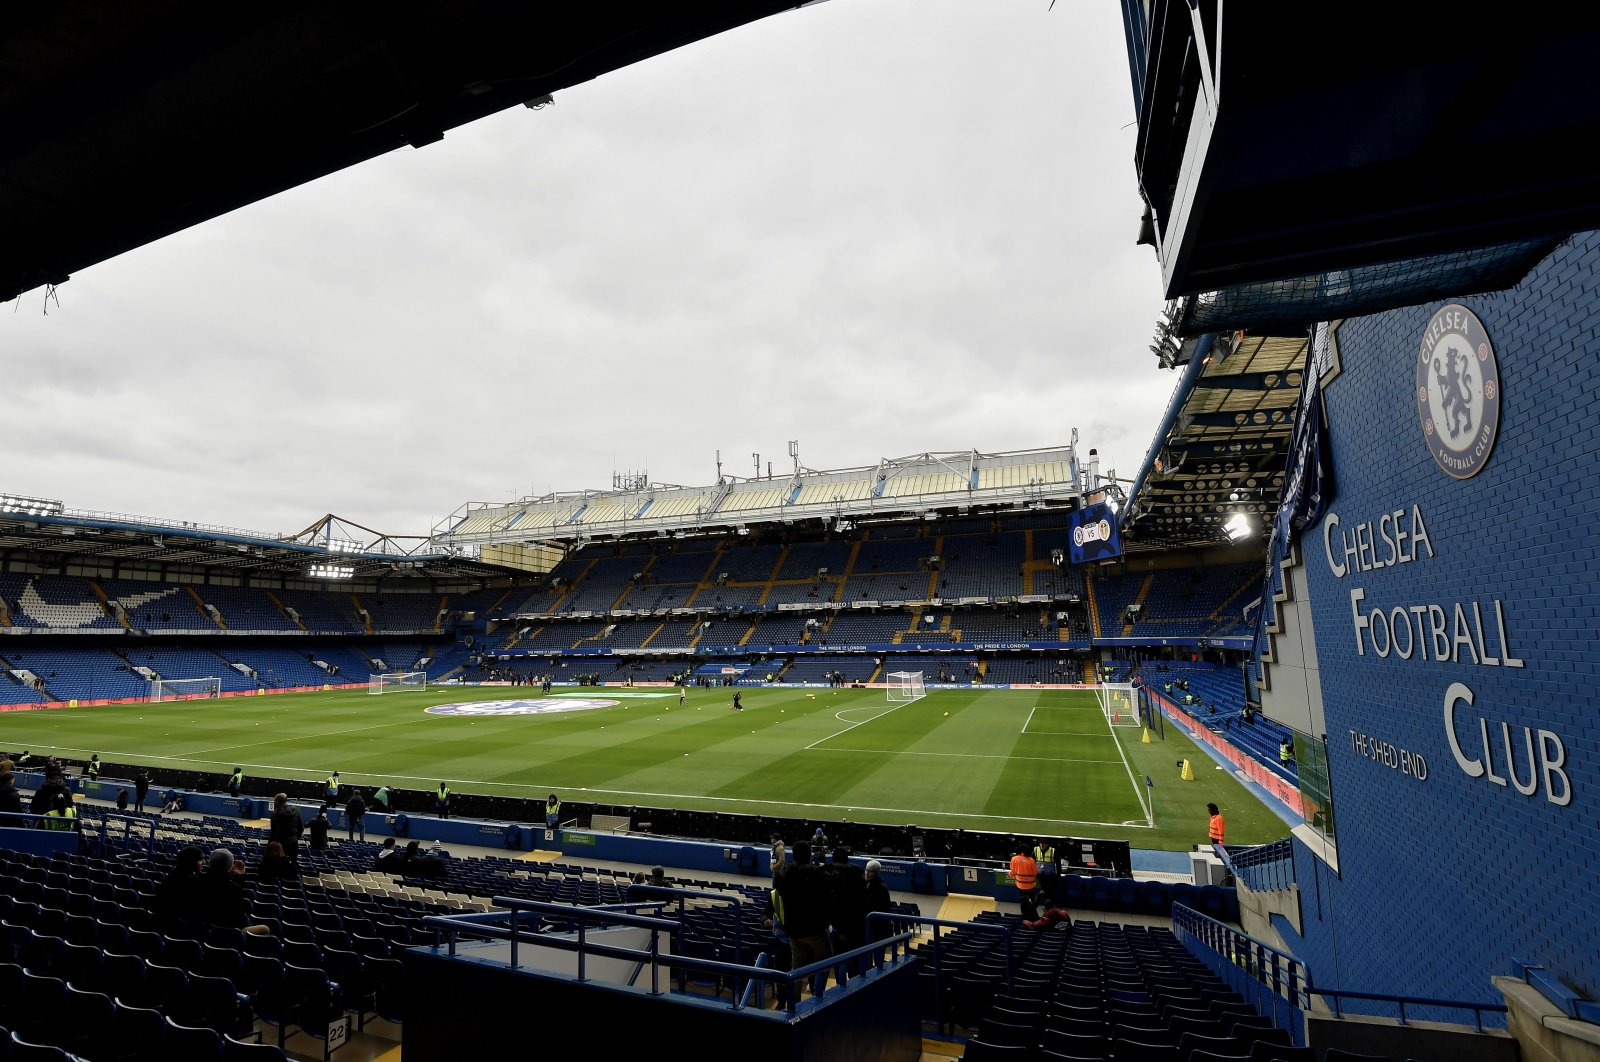 A general view of Stamford Bridge during the Premier League match between Chelsea FC and Leeds United, London, U.K., March 4, 2023. (Getty Image)